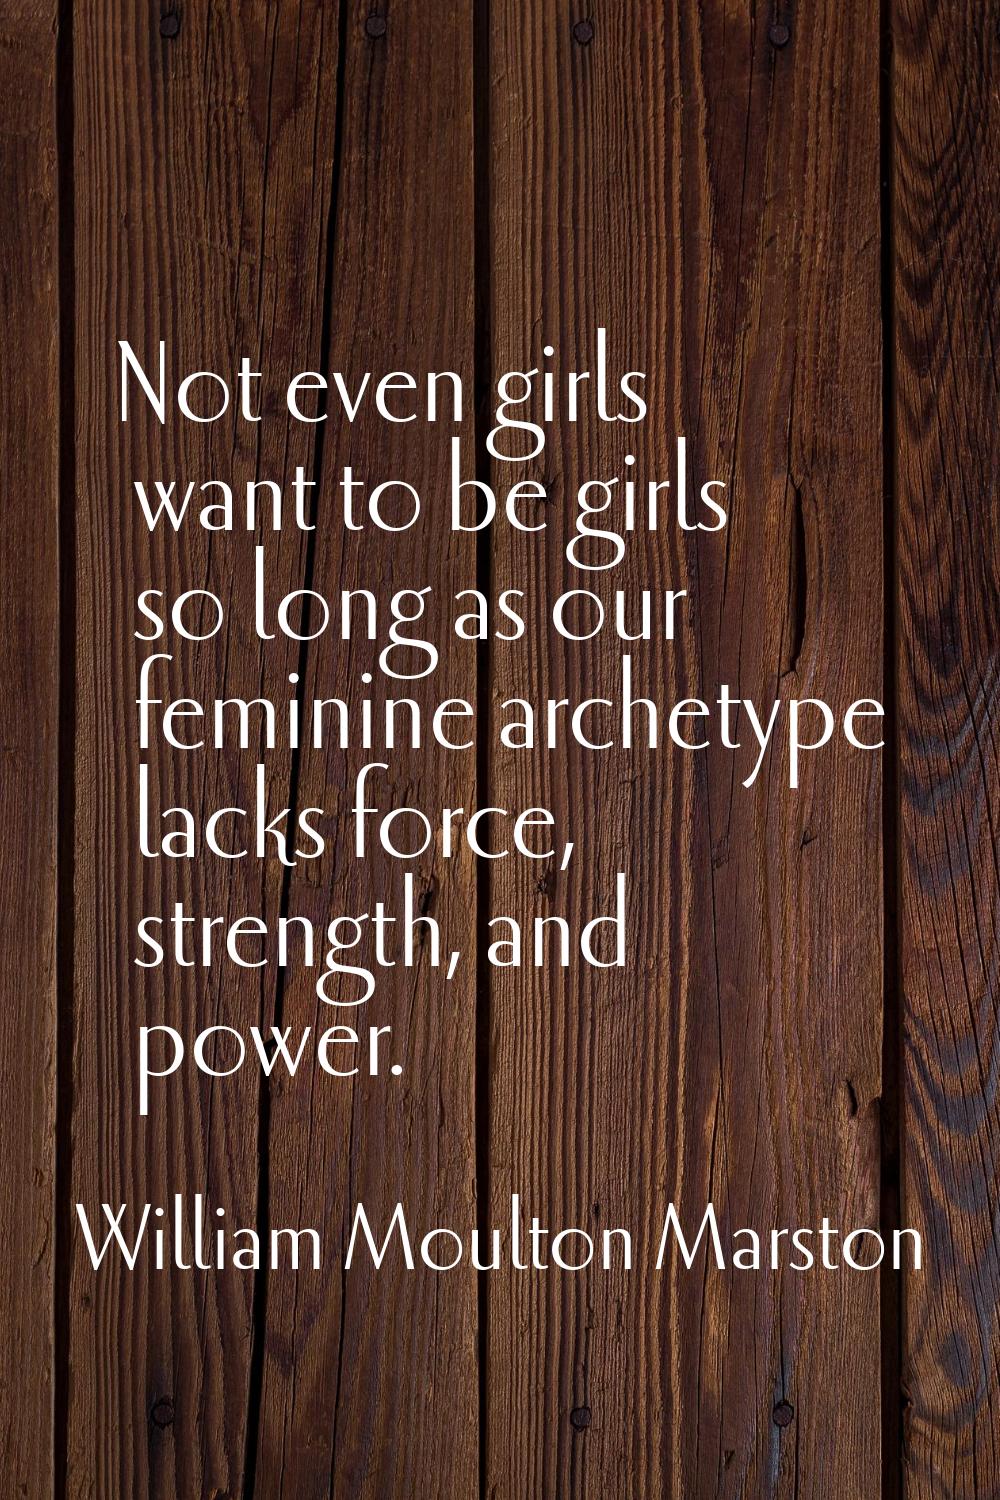 Not even girls want to be girls so long as our feminine archetype lacks force, strength, and power.